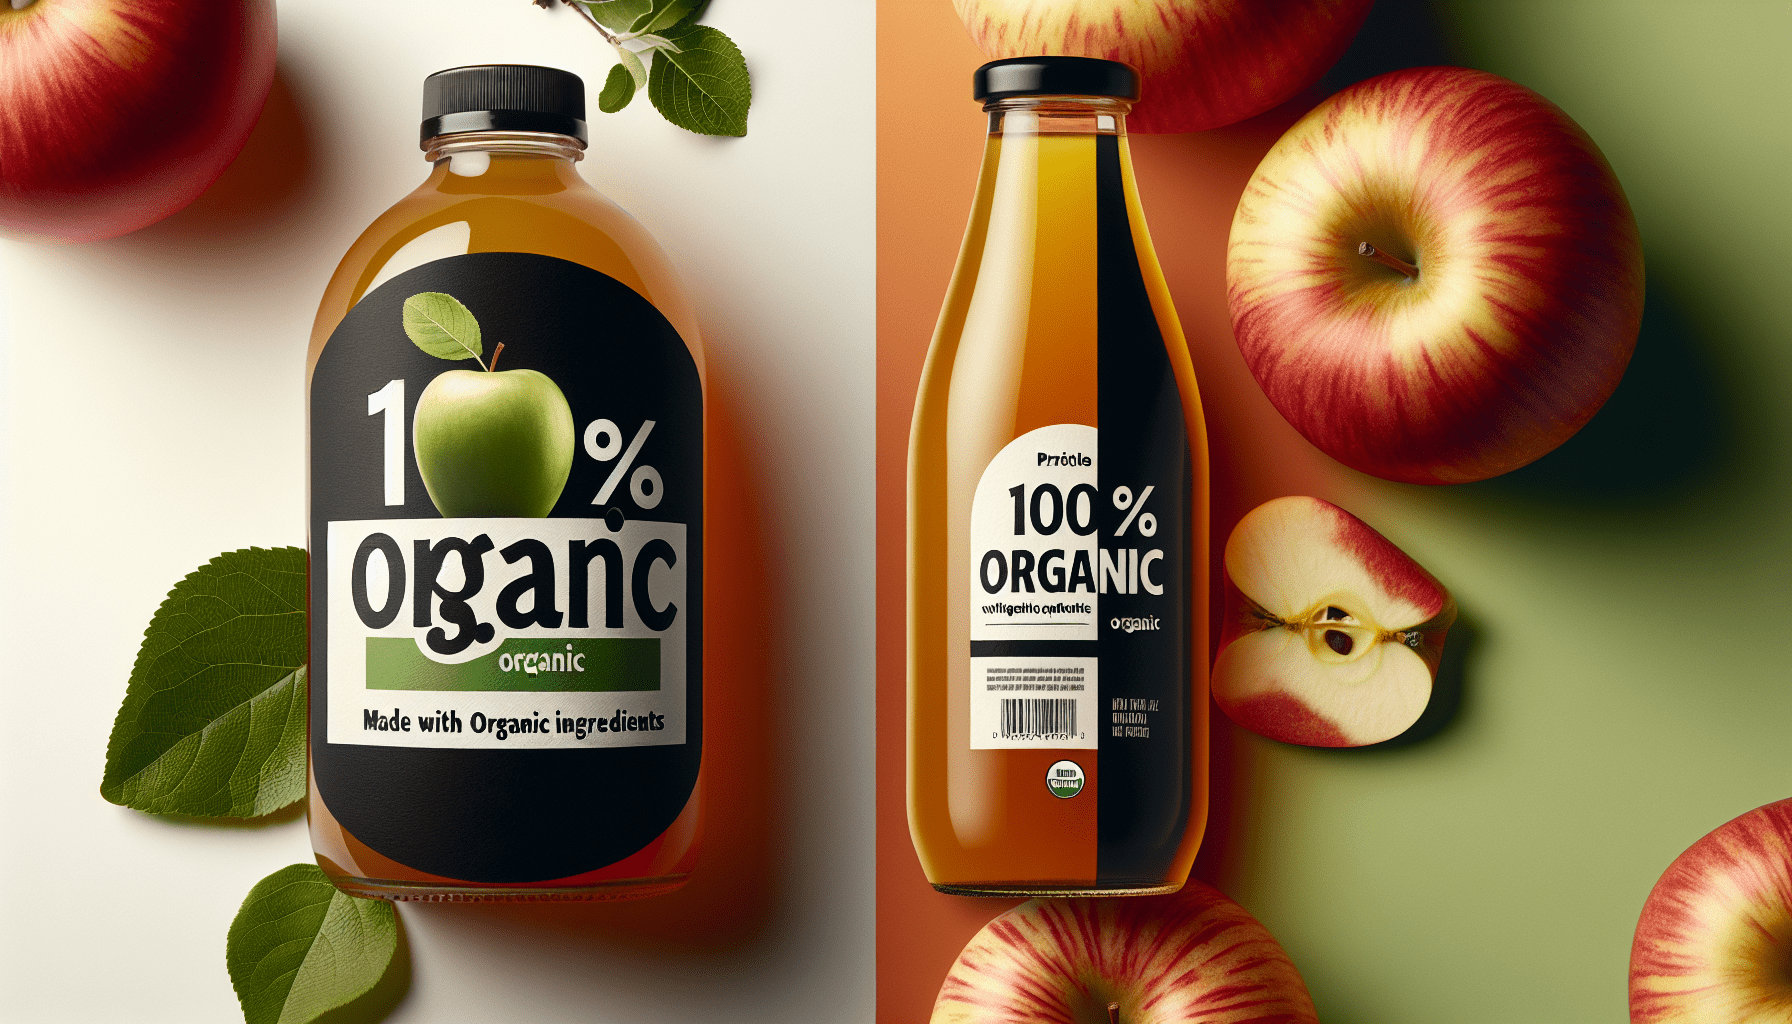 What Is The Difference Between “100% Organic” And “made With Organic Ingredients”?